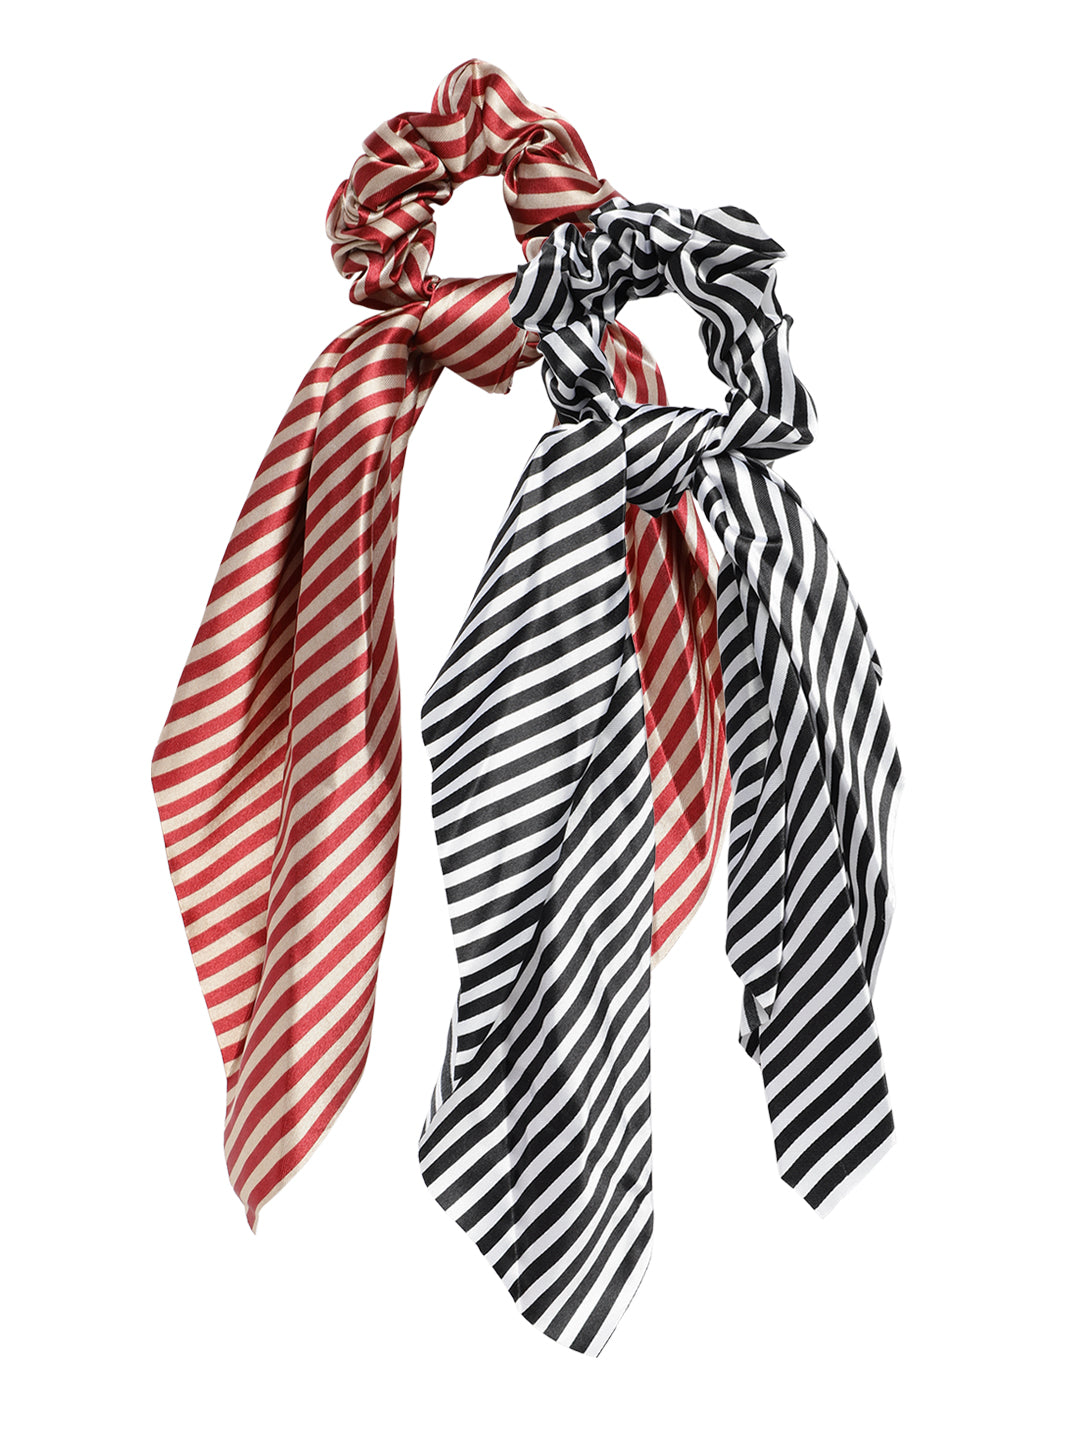 Laida Set of 2 Striped Scrunchies with Knot Detail